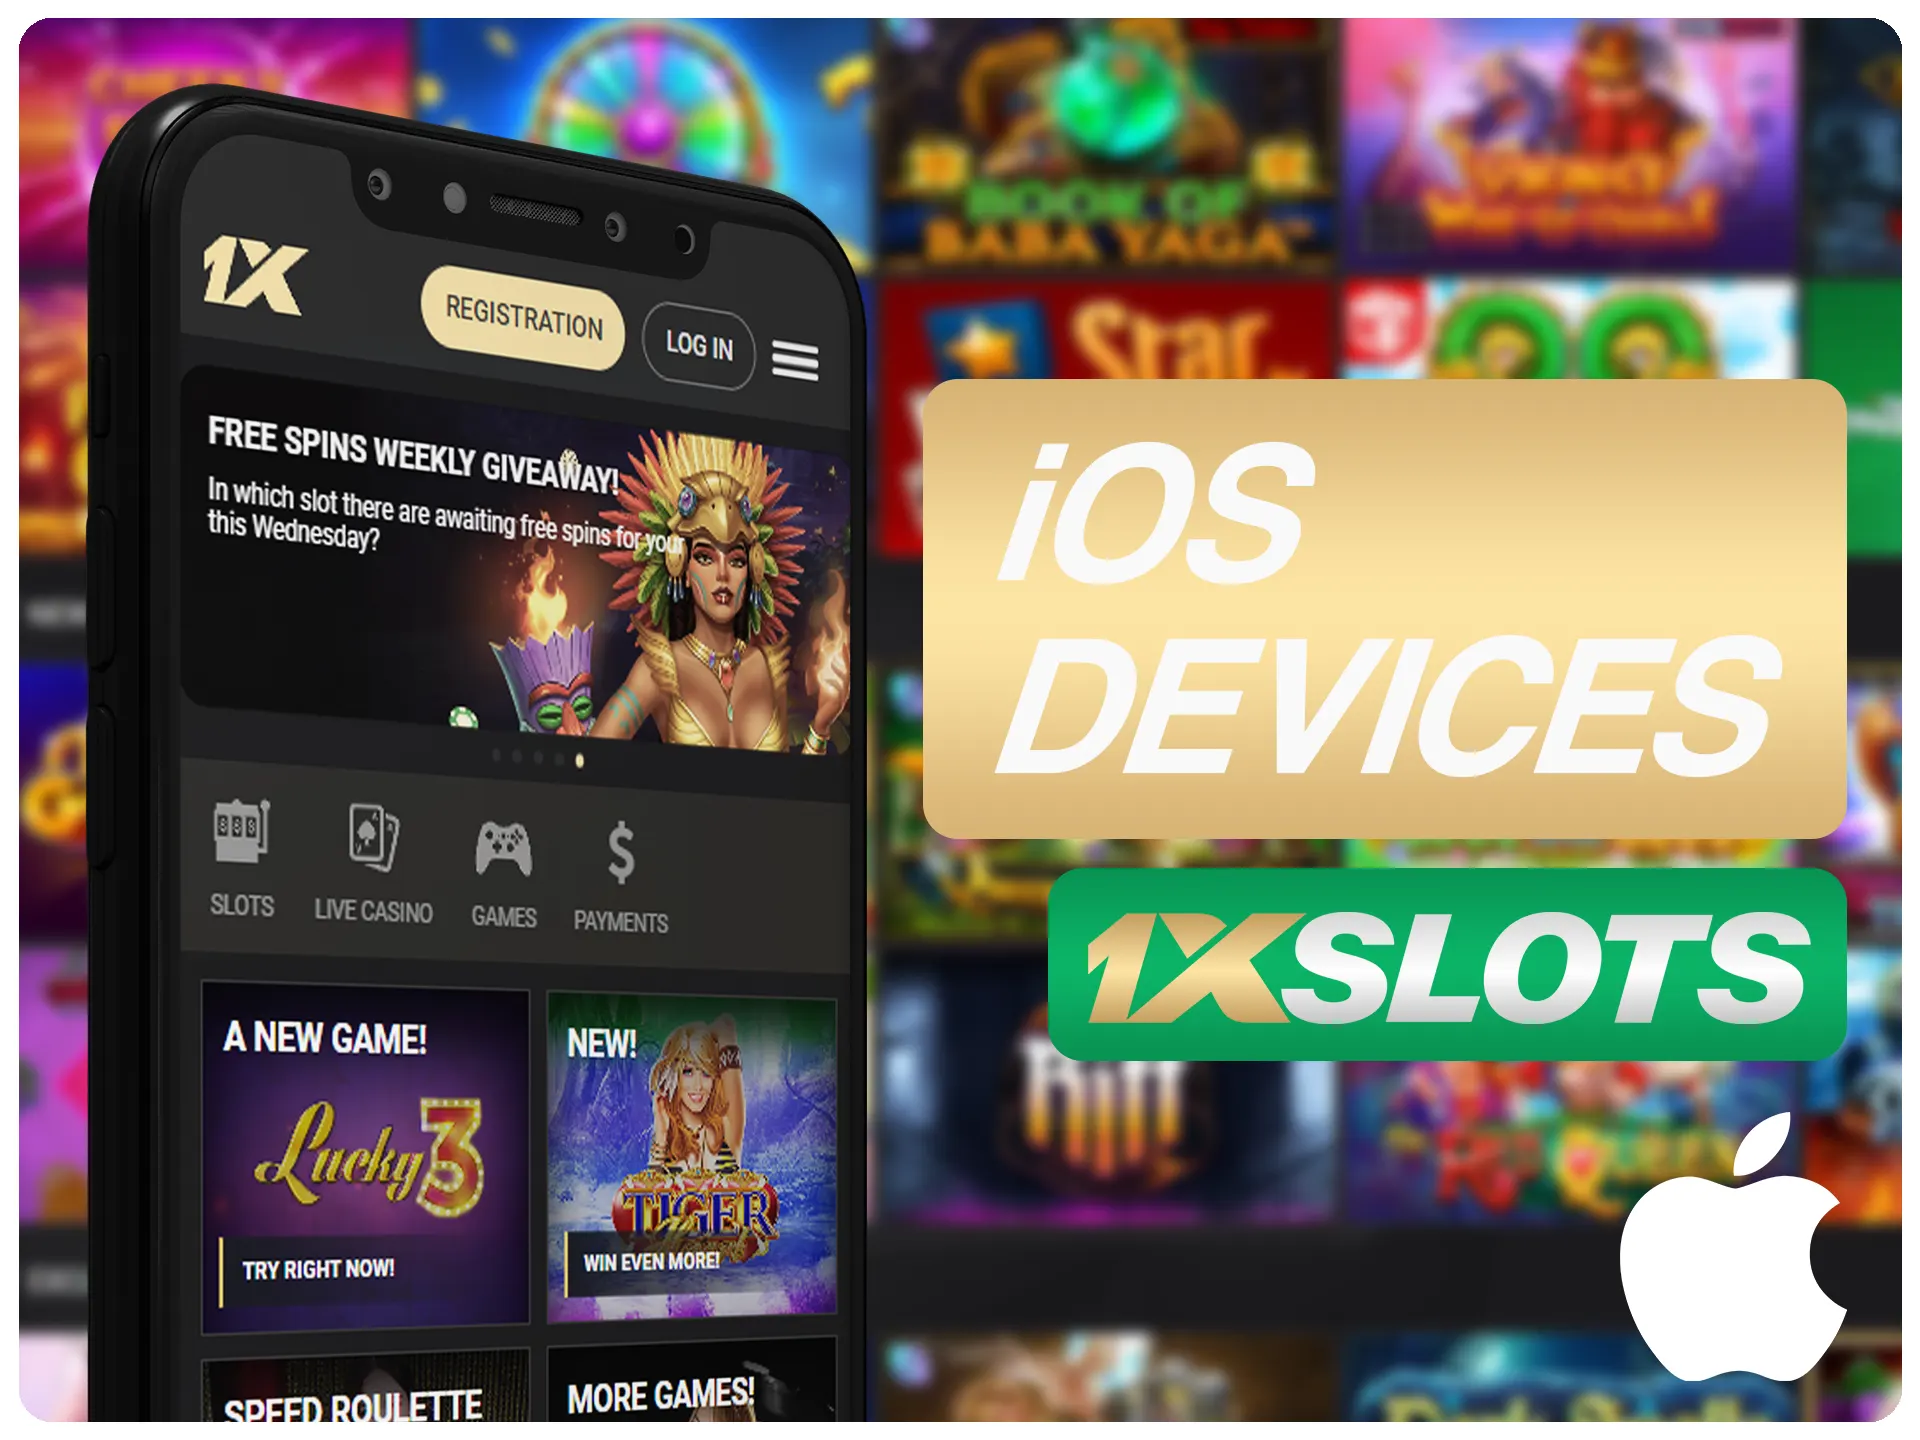 1xSlots app can be installed on any of iOS device.